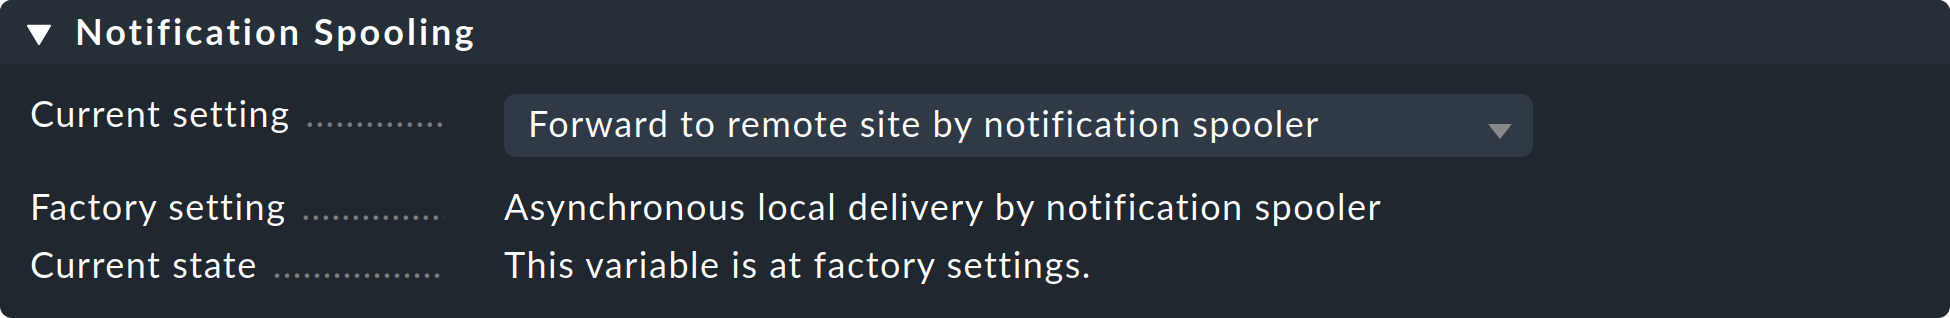 distributed monitoring notification spooling